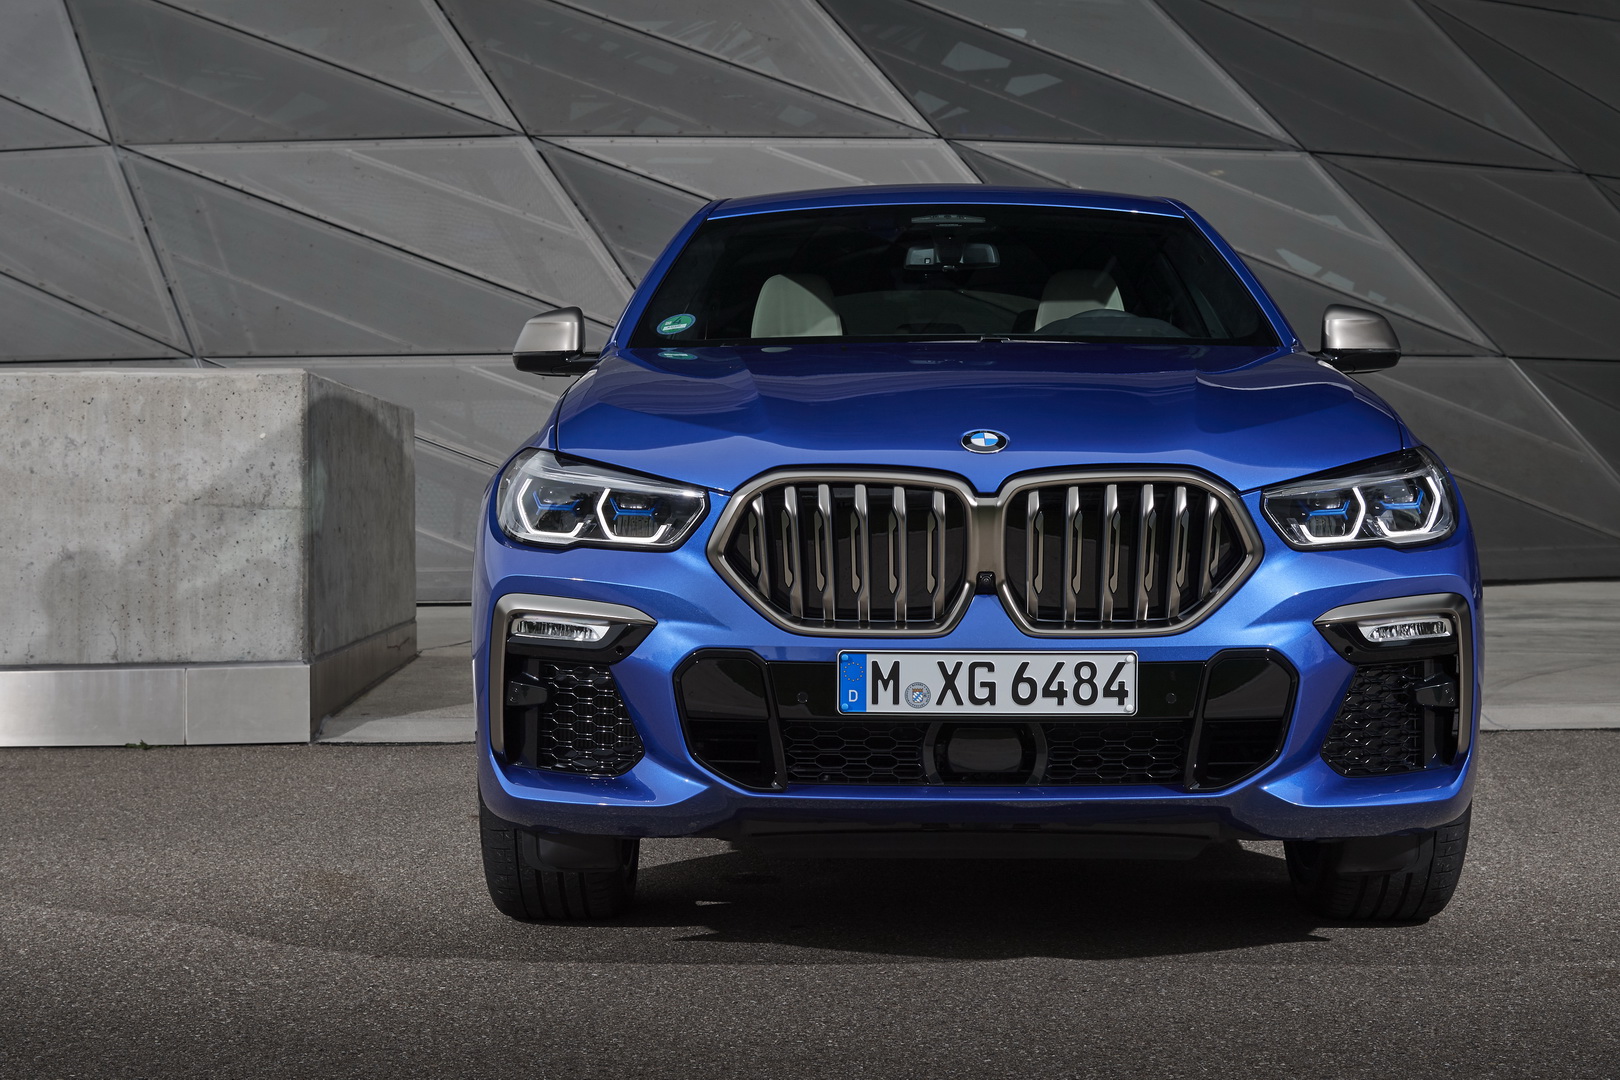 2020 Bmw X5 Xdrive40d And X6 Xdrive40d Blend Diesel Muscle With Mild Hybrid Tech Carscoops